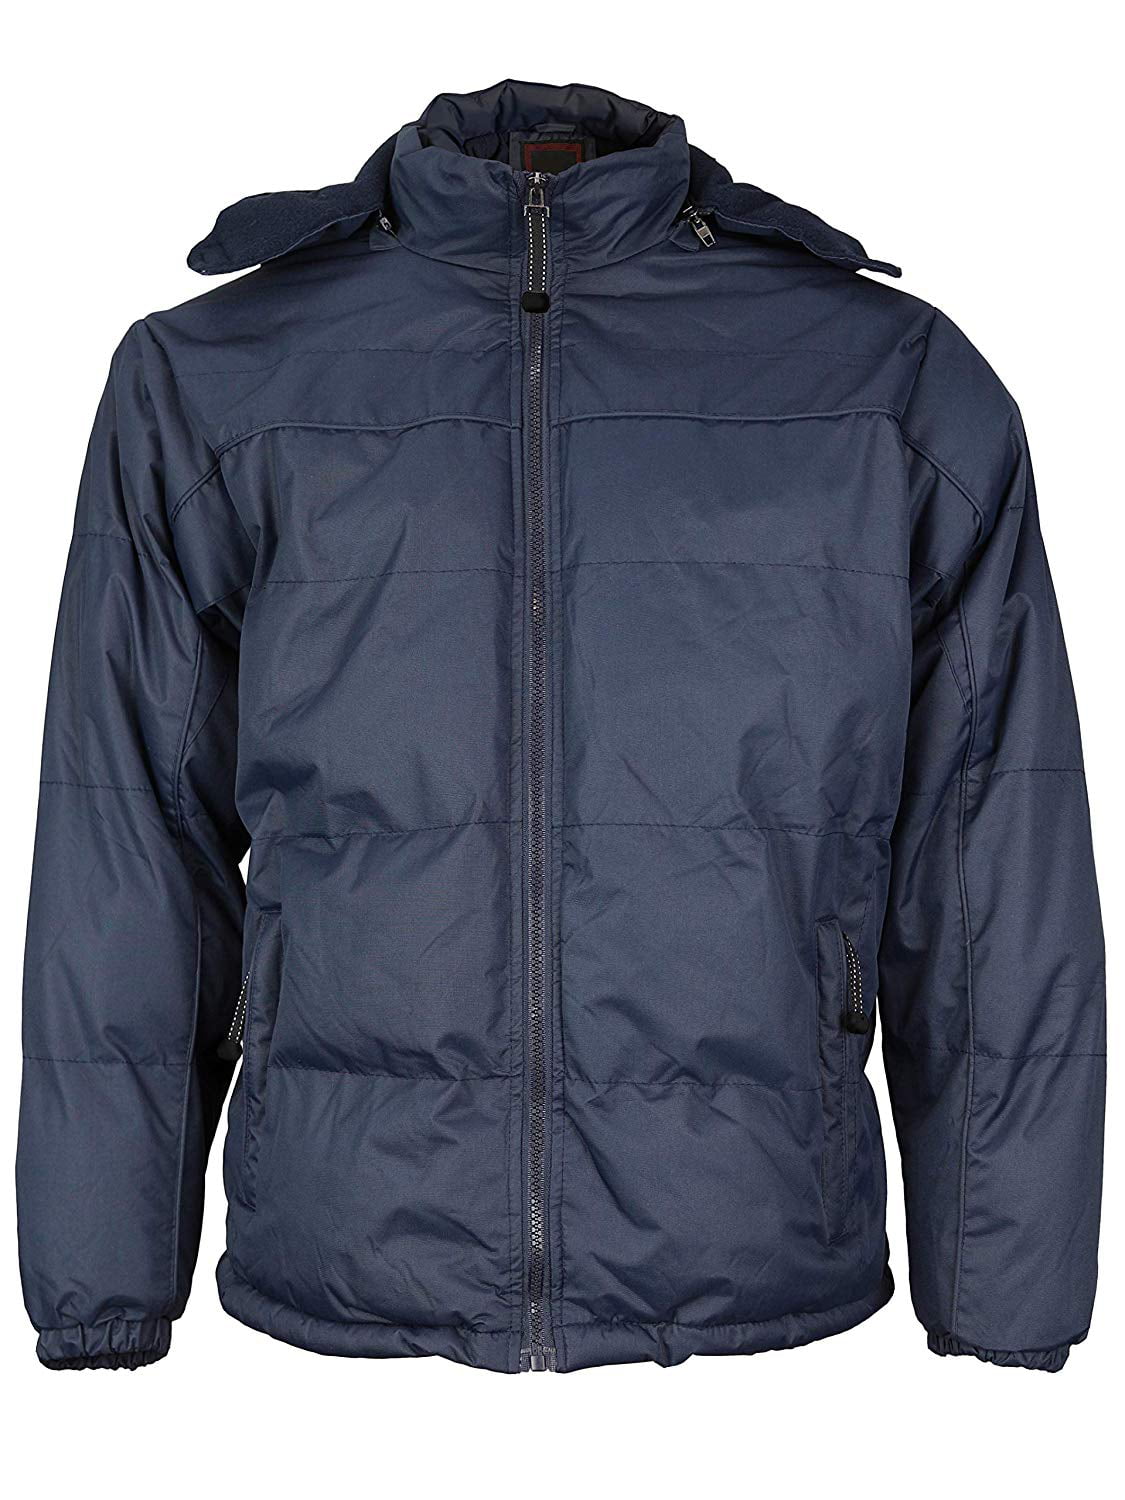 VKWEAR - Men's Heavyweight Insulated Lined Jacket with Removable Hood ...